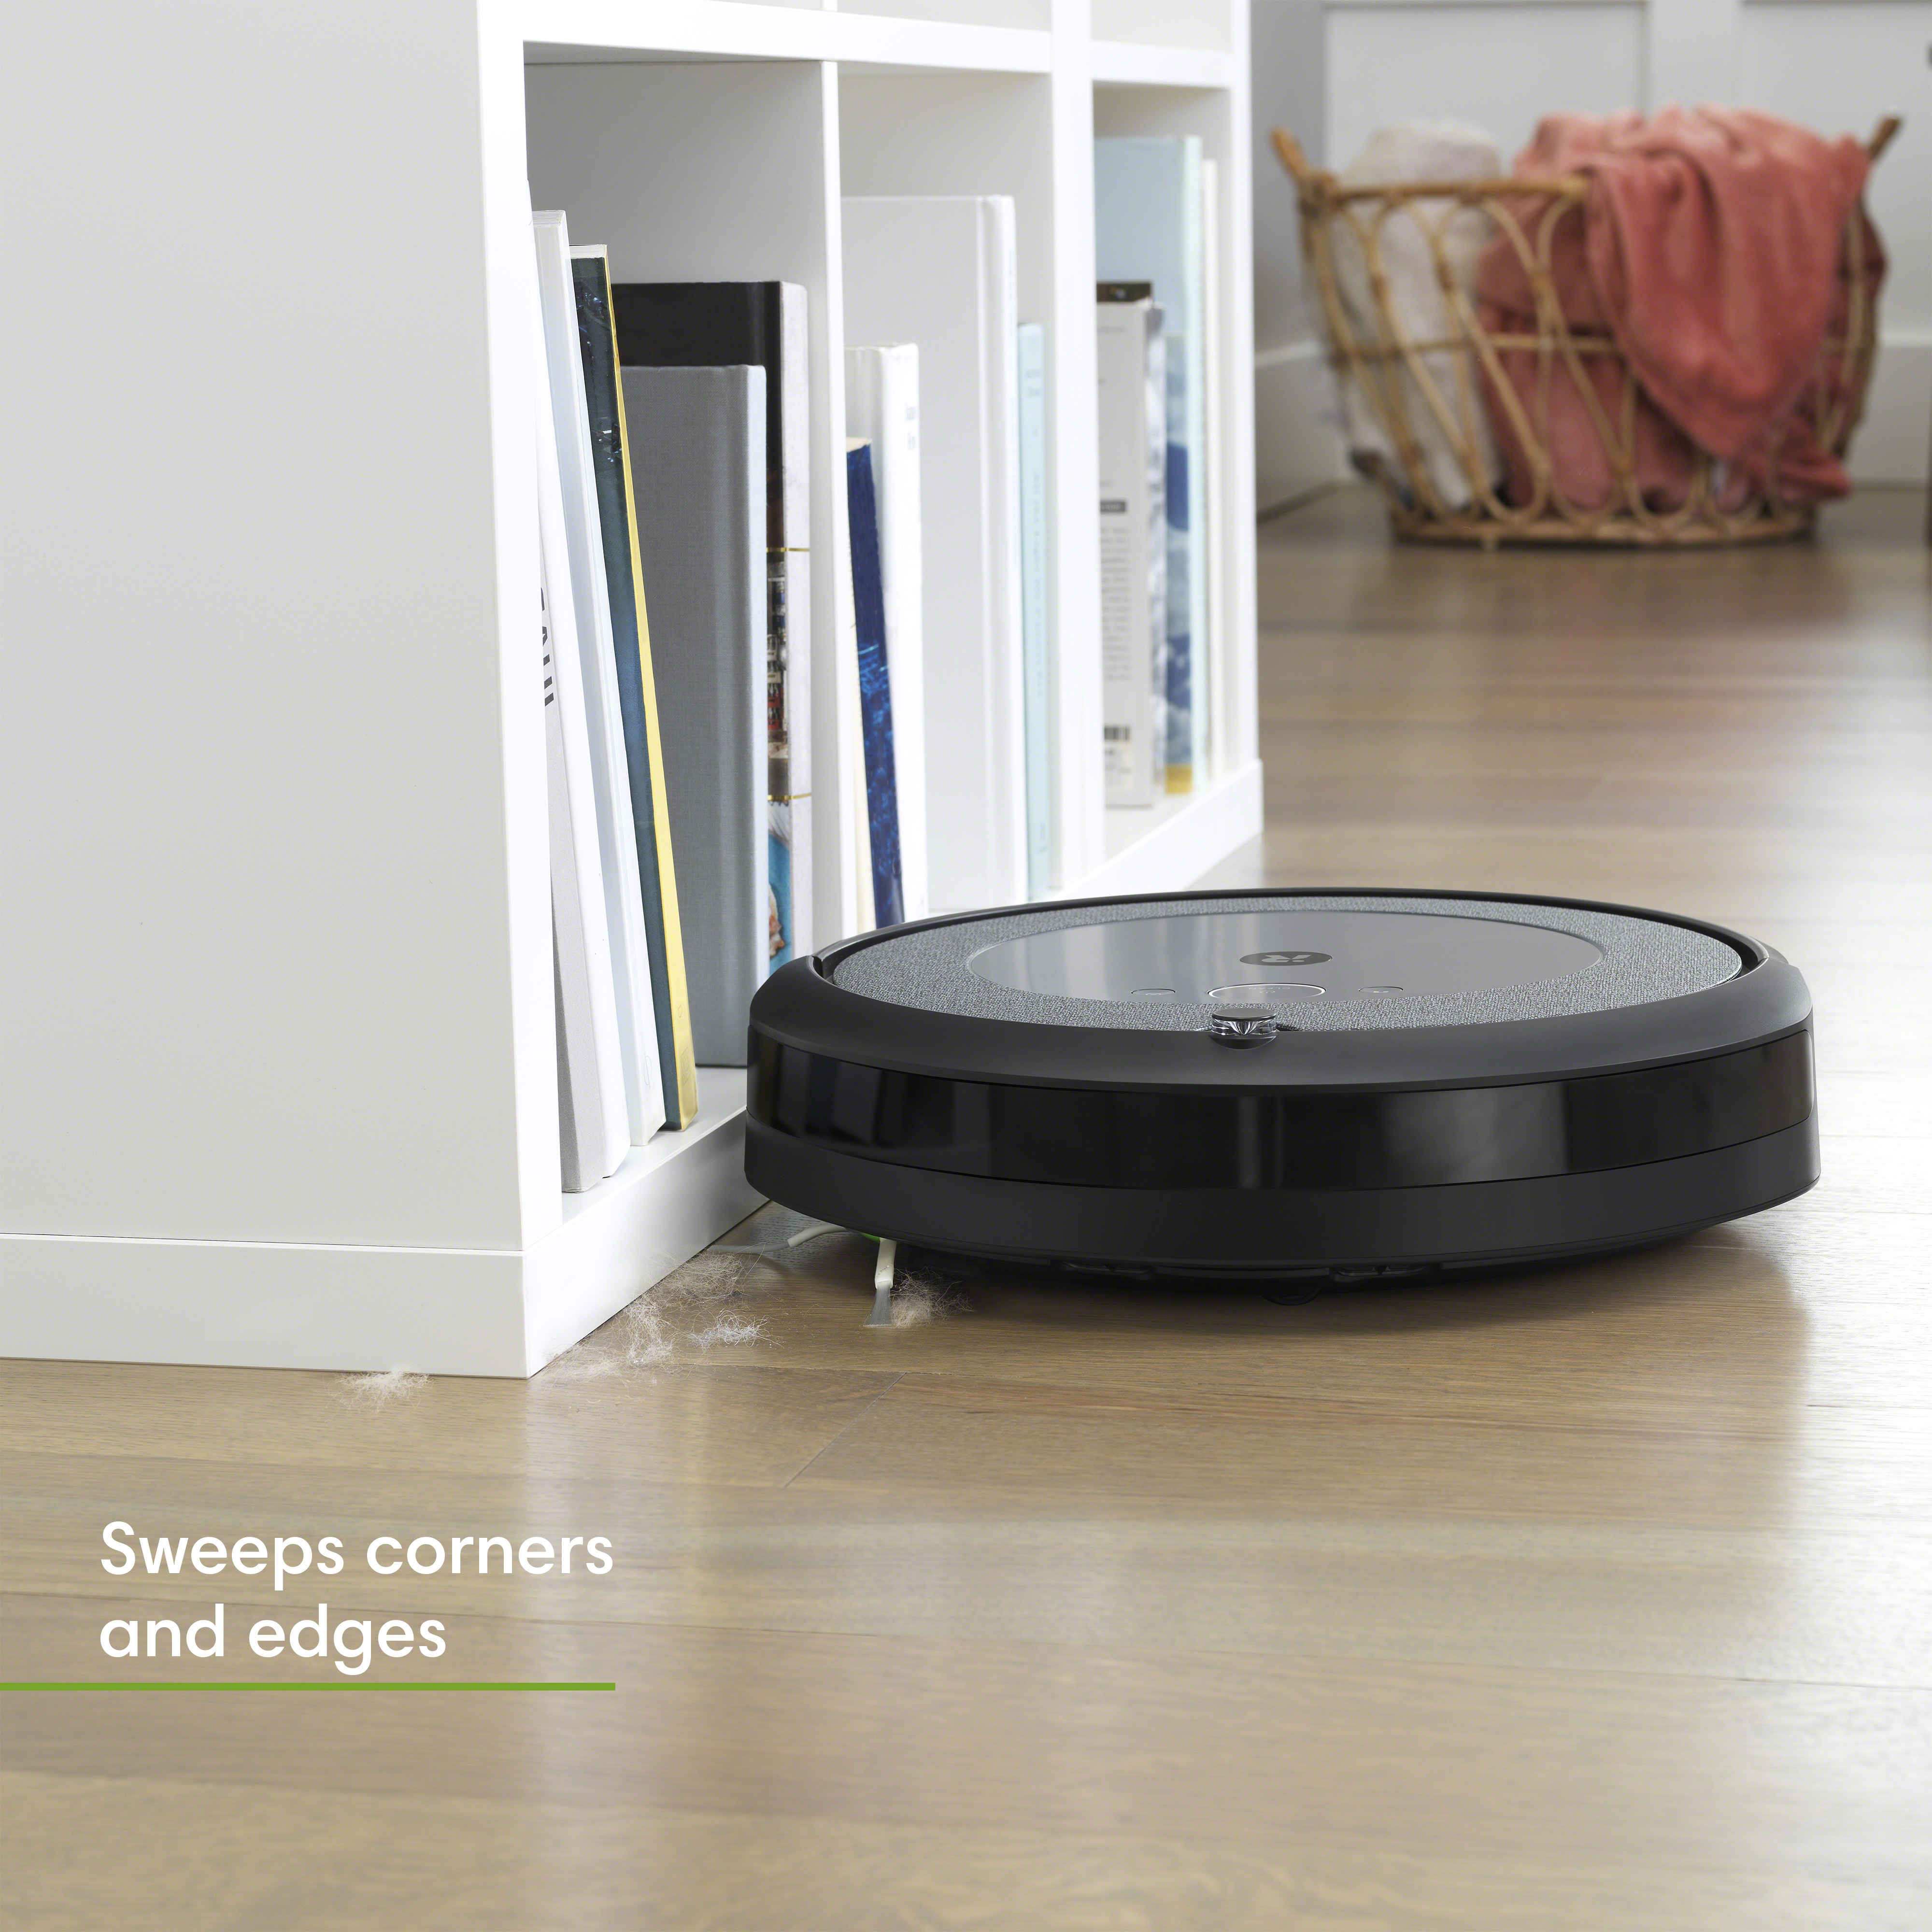 iRobot® Roomba® i3+ EVO (3550) Self-Emptying Robot Vacuum – Now Clean By Room With Smart Mapping, Empties Itself For Up To 60 Days, Works With Google, Ideal For Pet Hair, Carpets​ - image 3 of 15